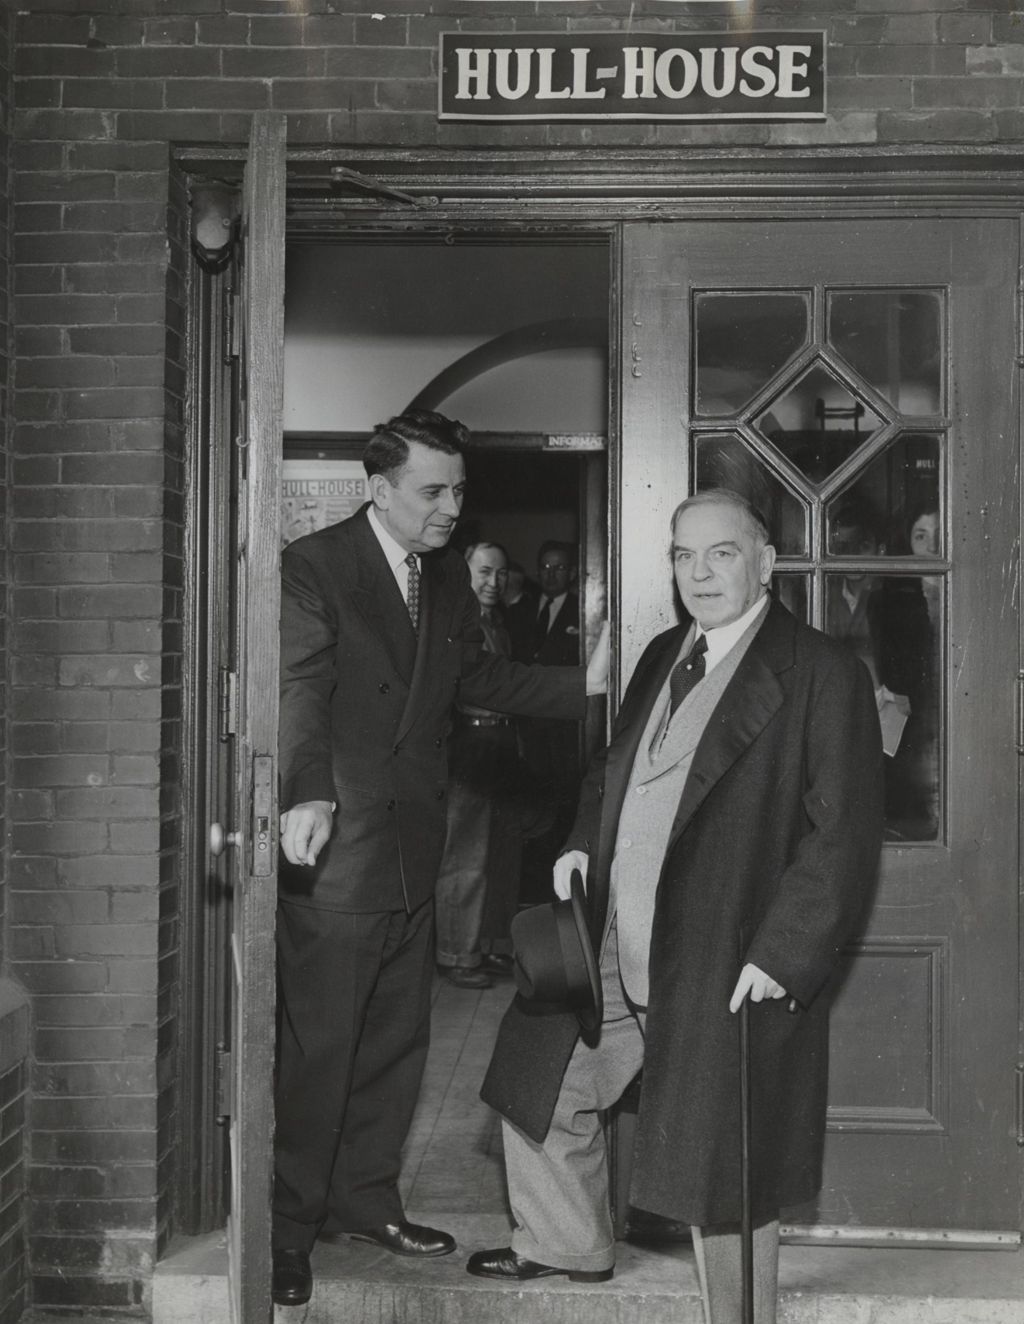 Miniature of Canadian Prime Minister and former Hull-House resident W. L. Mackenzie King at the entrance of Hull-House